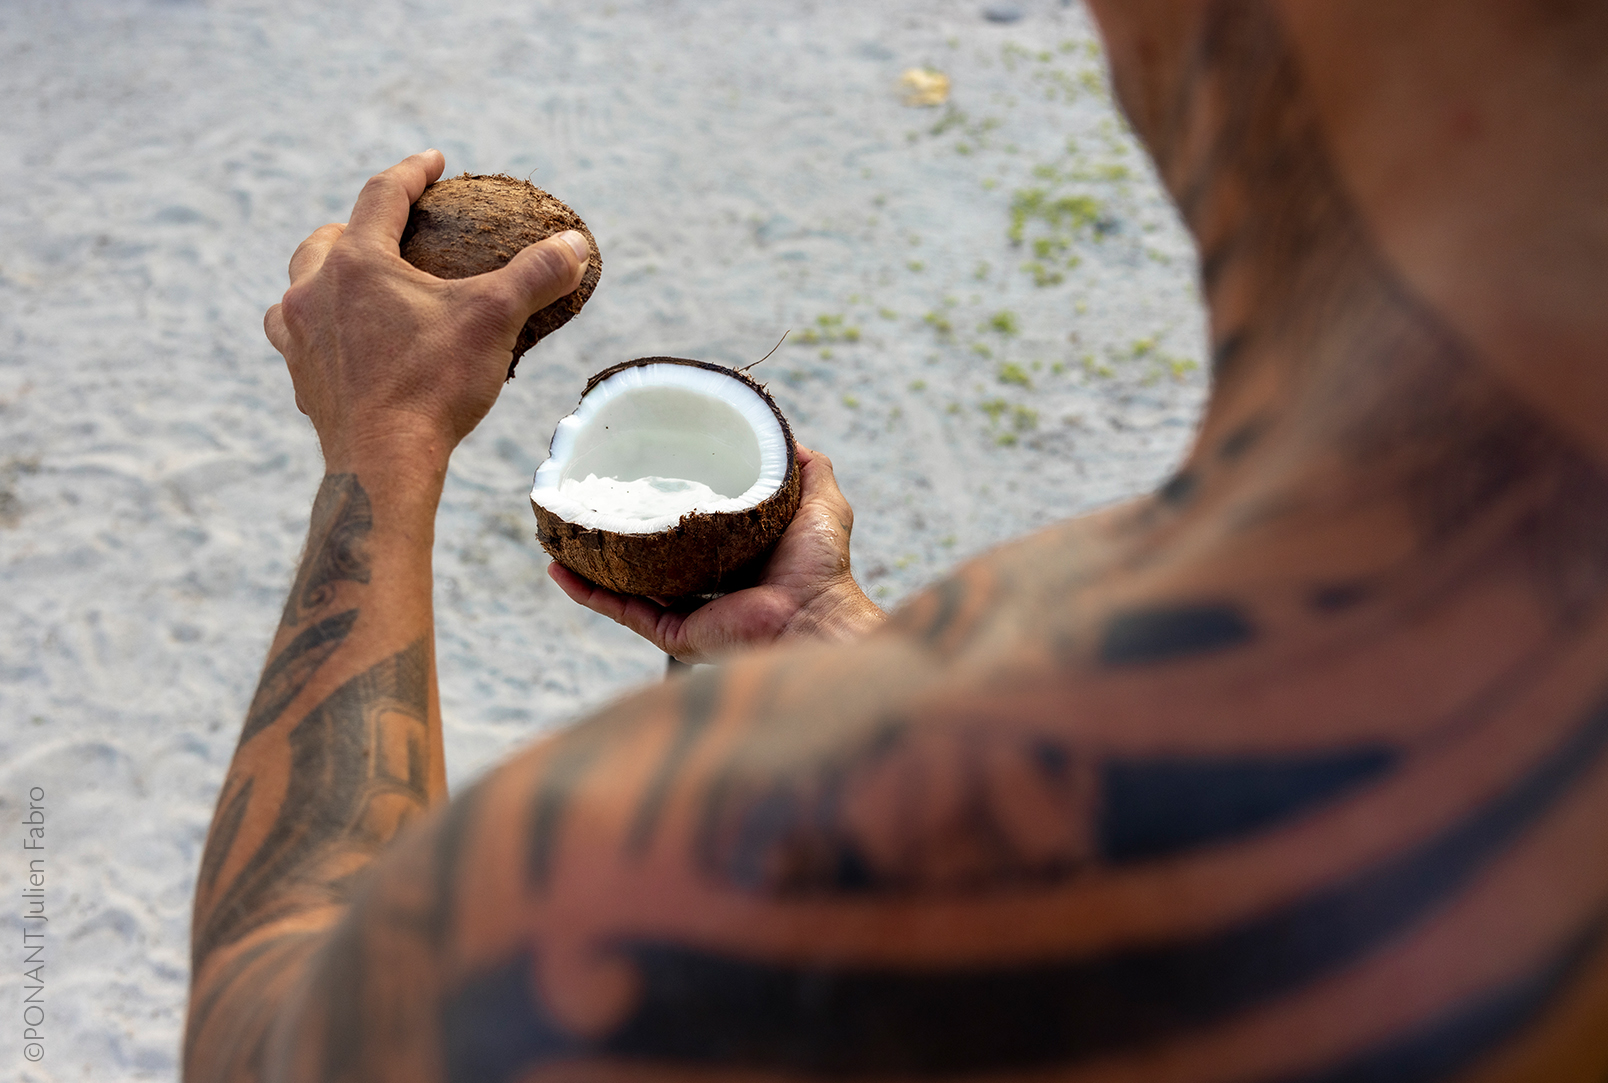 The coconut reigns supreme throughout French Polynesia, revered for myriad uses from food and shelter to medicine and more.